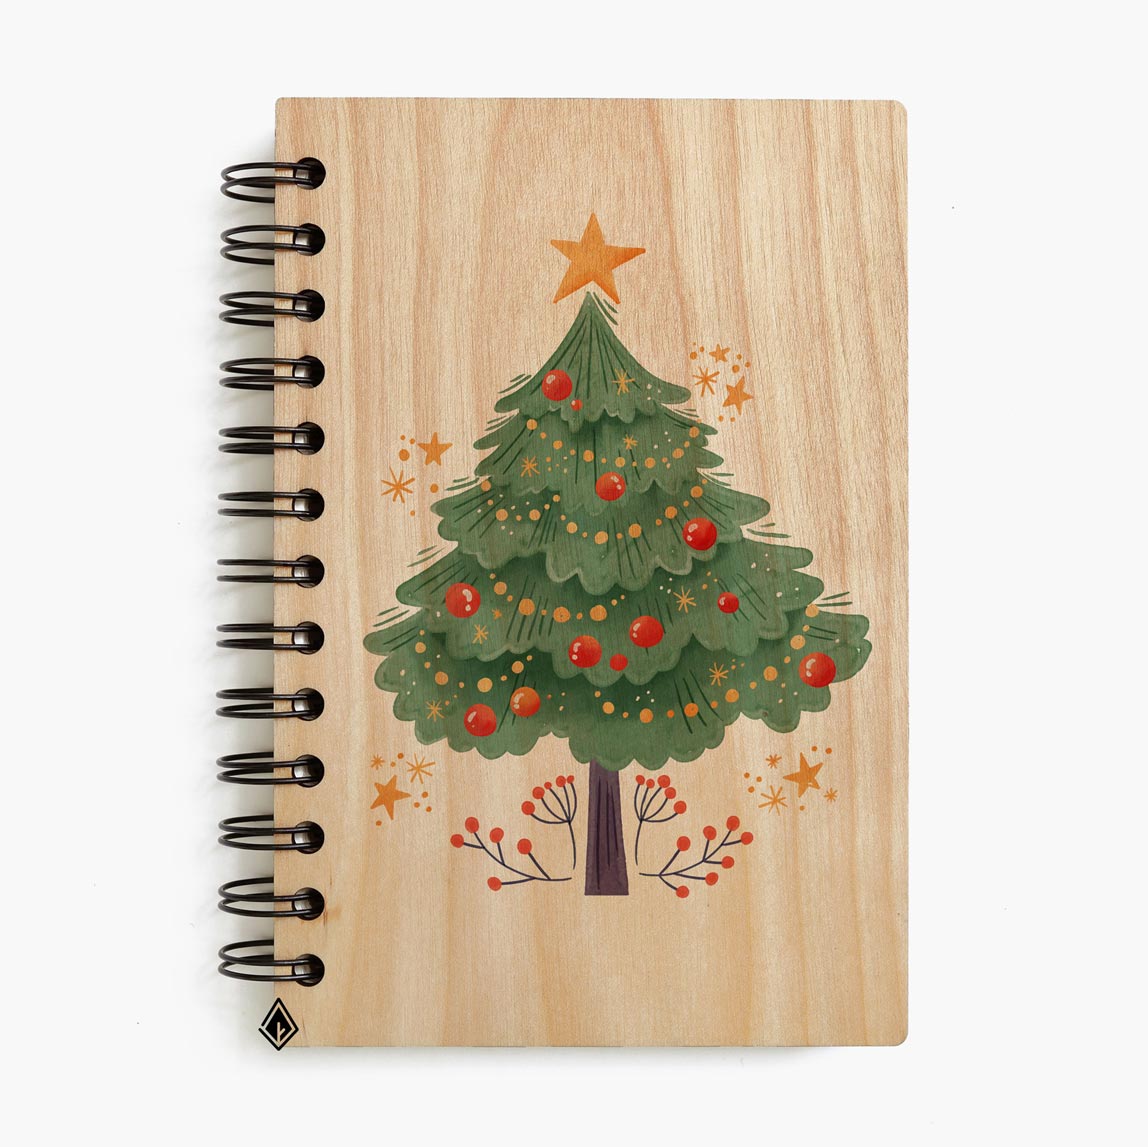 Sparkling Christmas tree maple wooden notebook